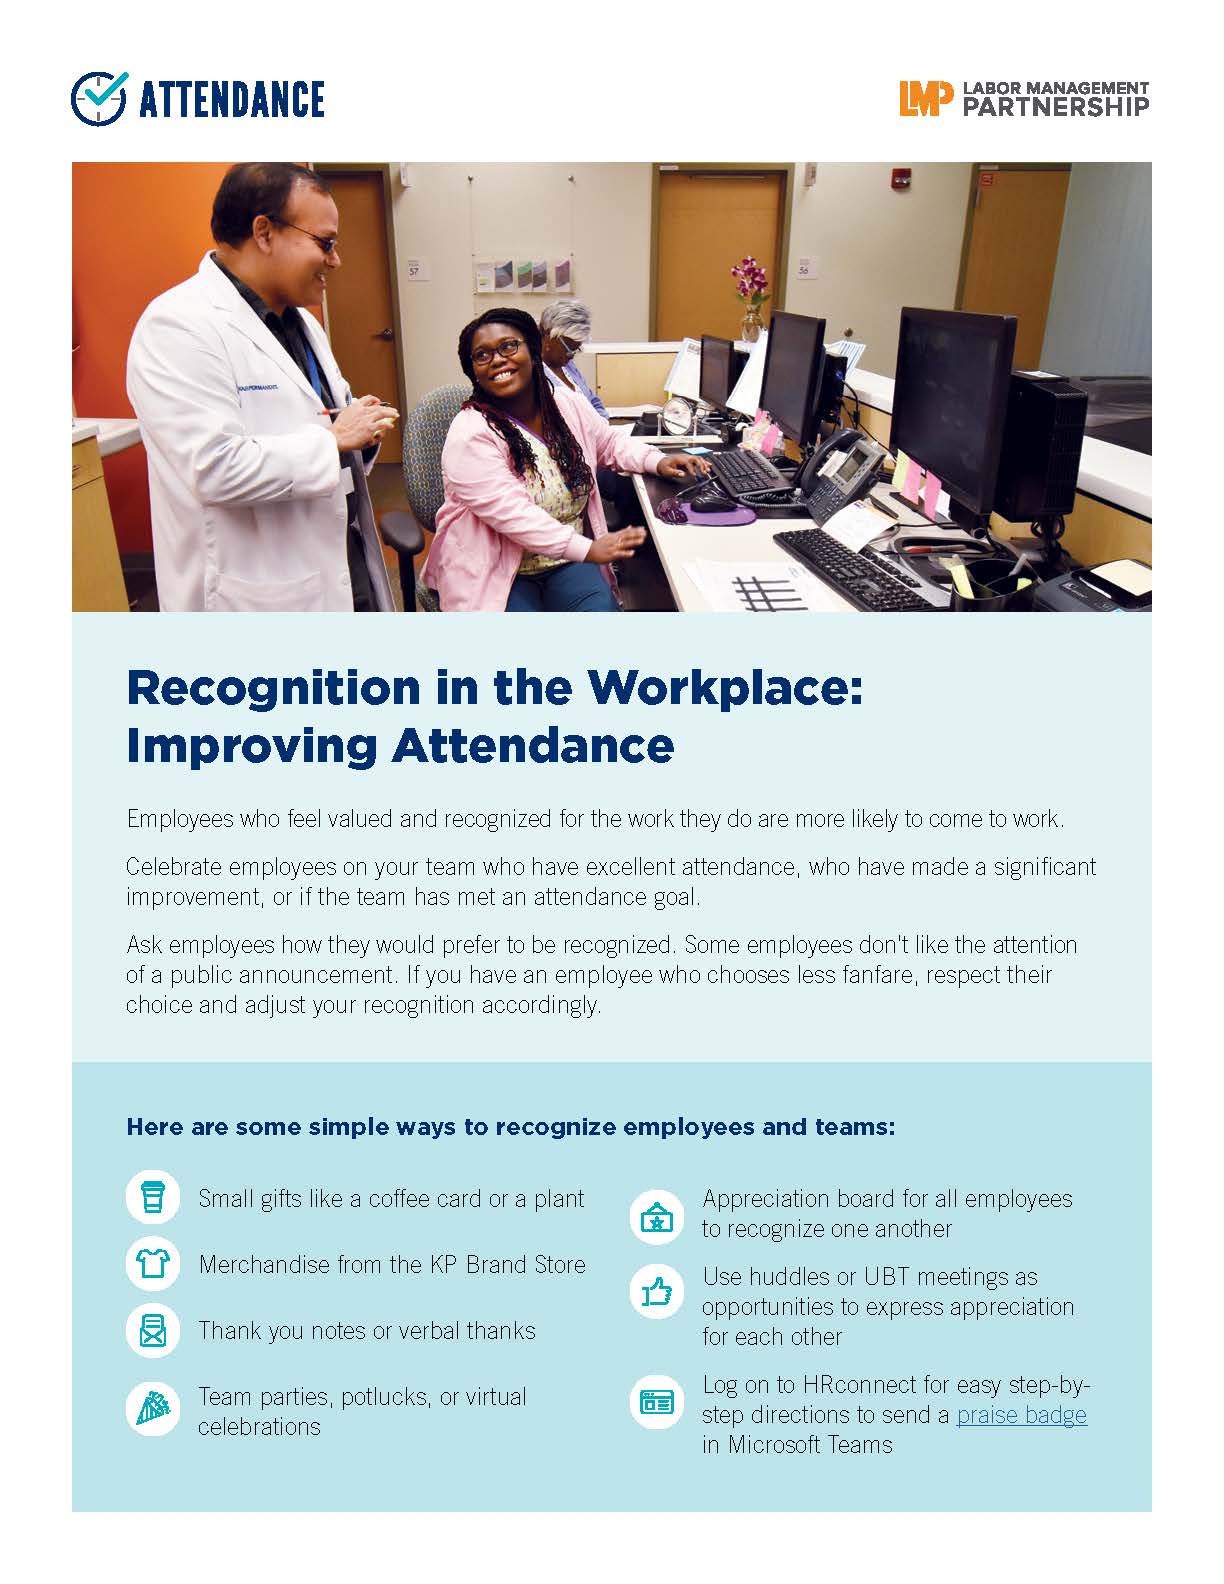 flier with a photo of 2 health care workers at a bank of computers, smiling at each other